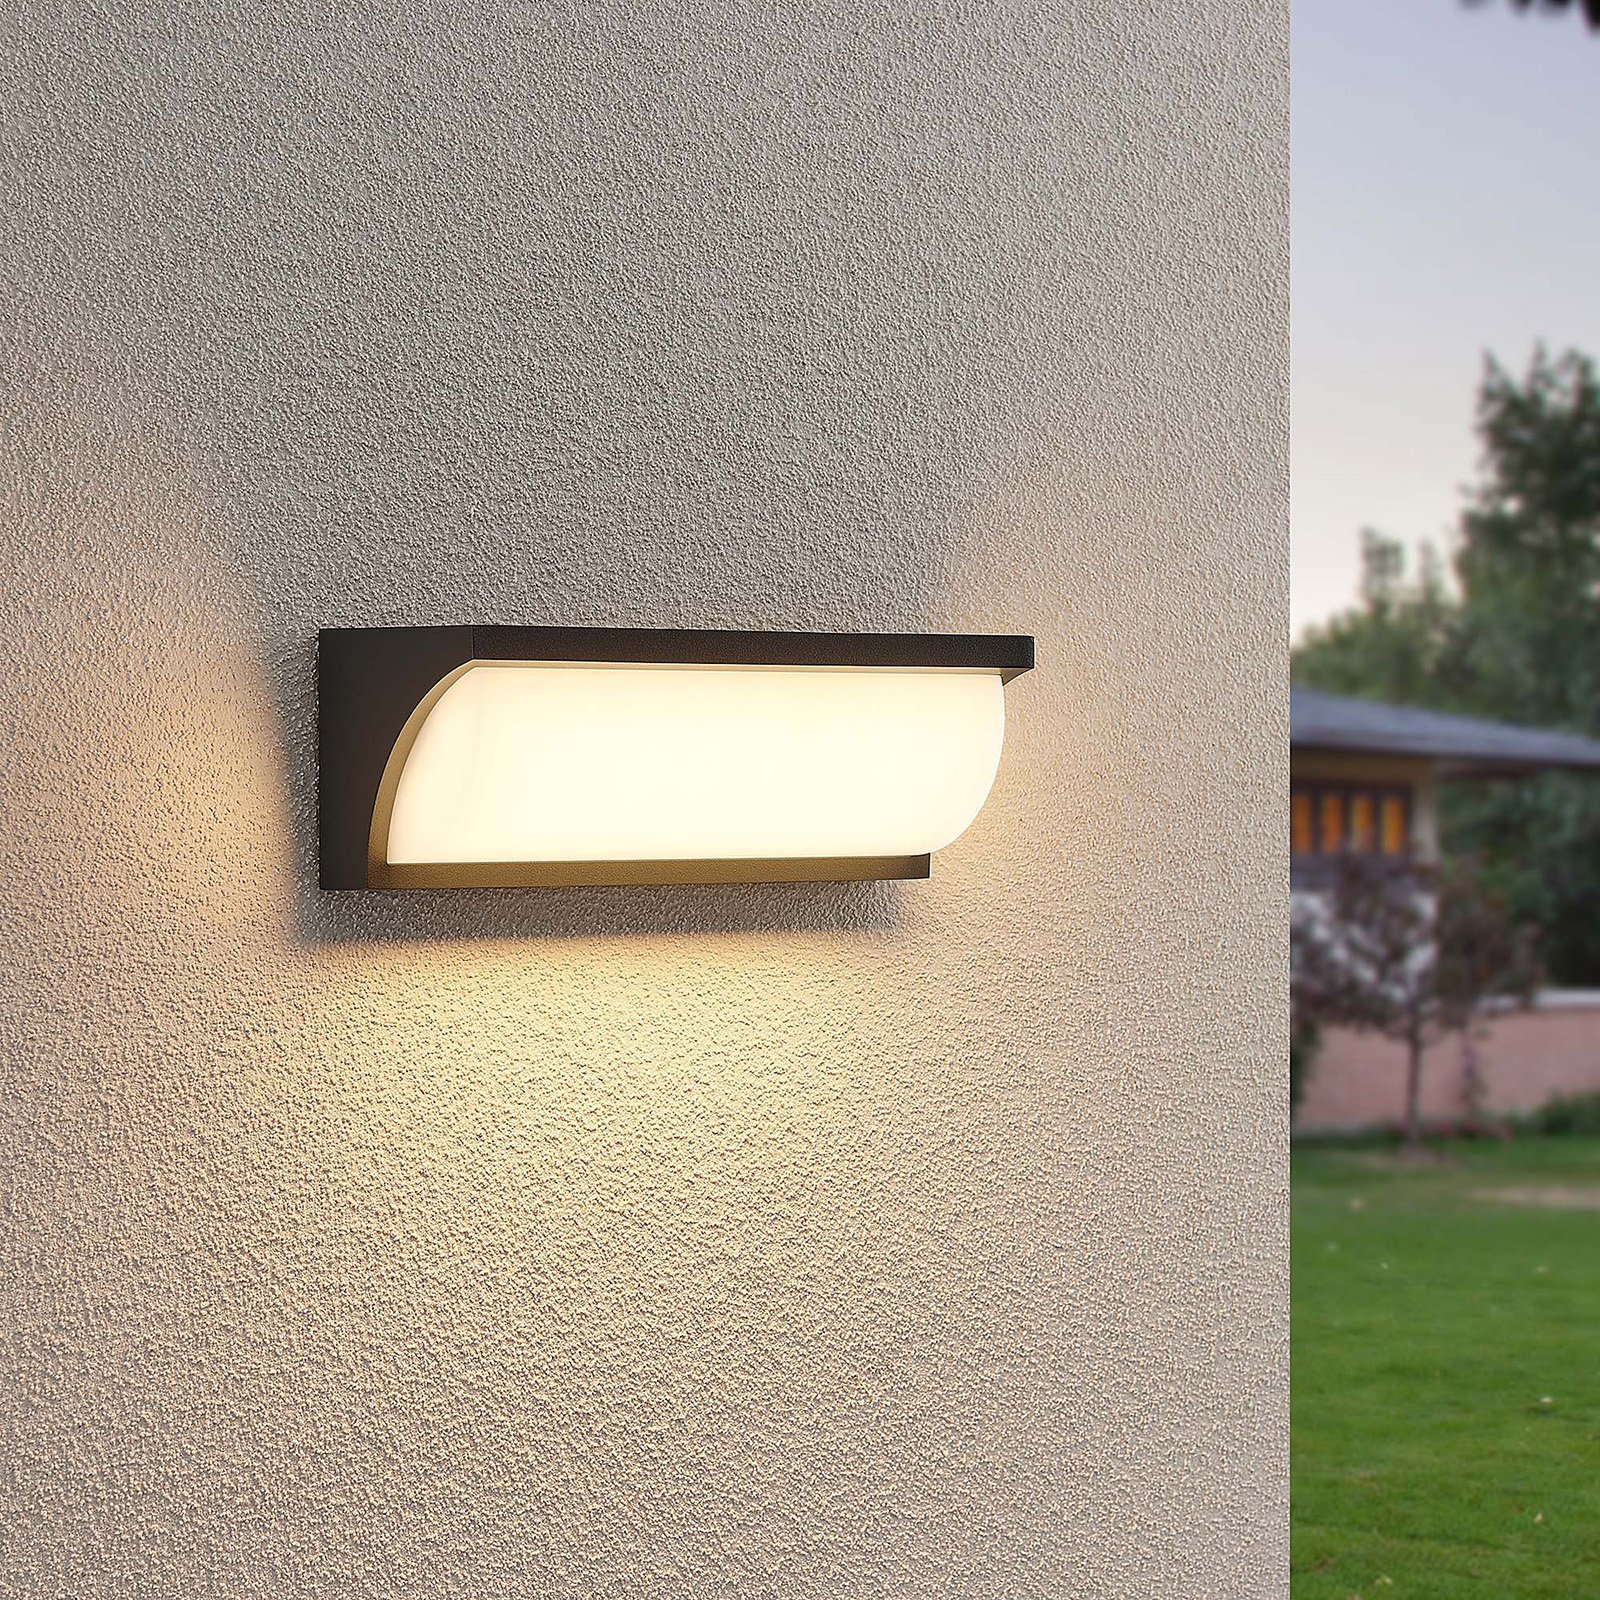 Lucande Aune LED outdoor wall light